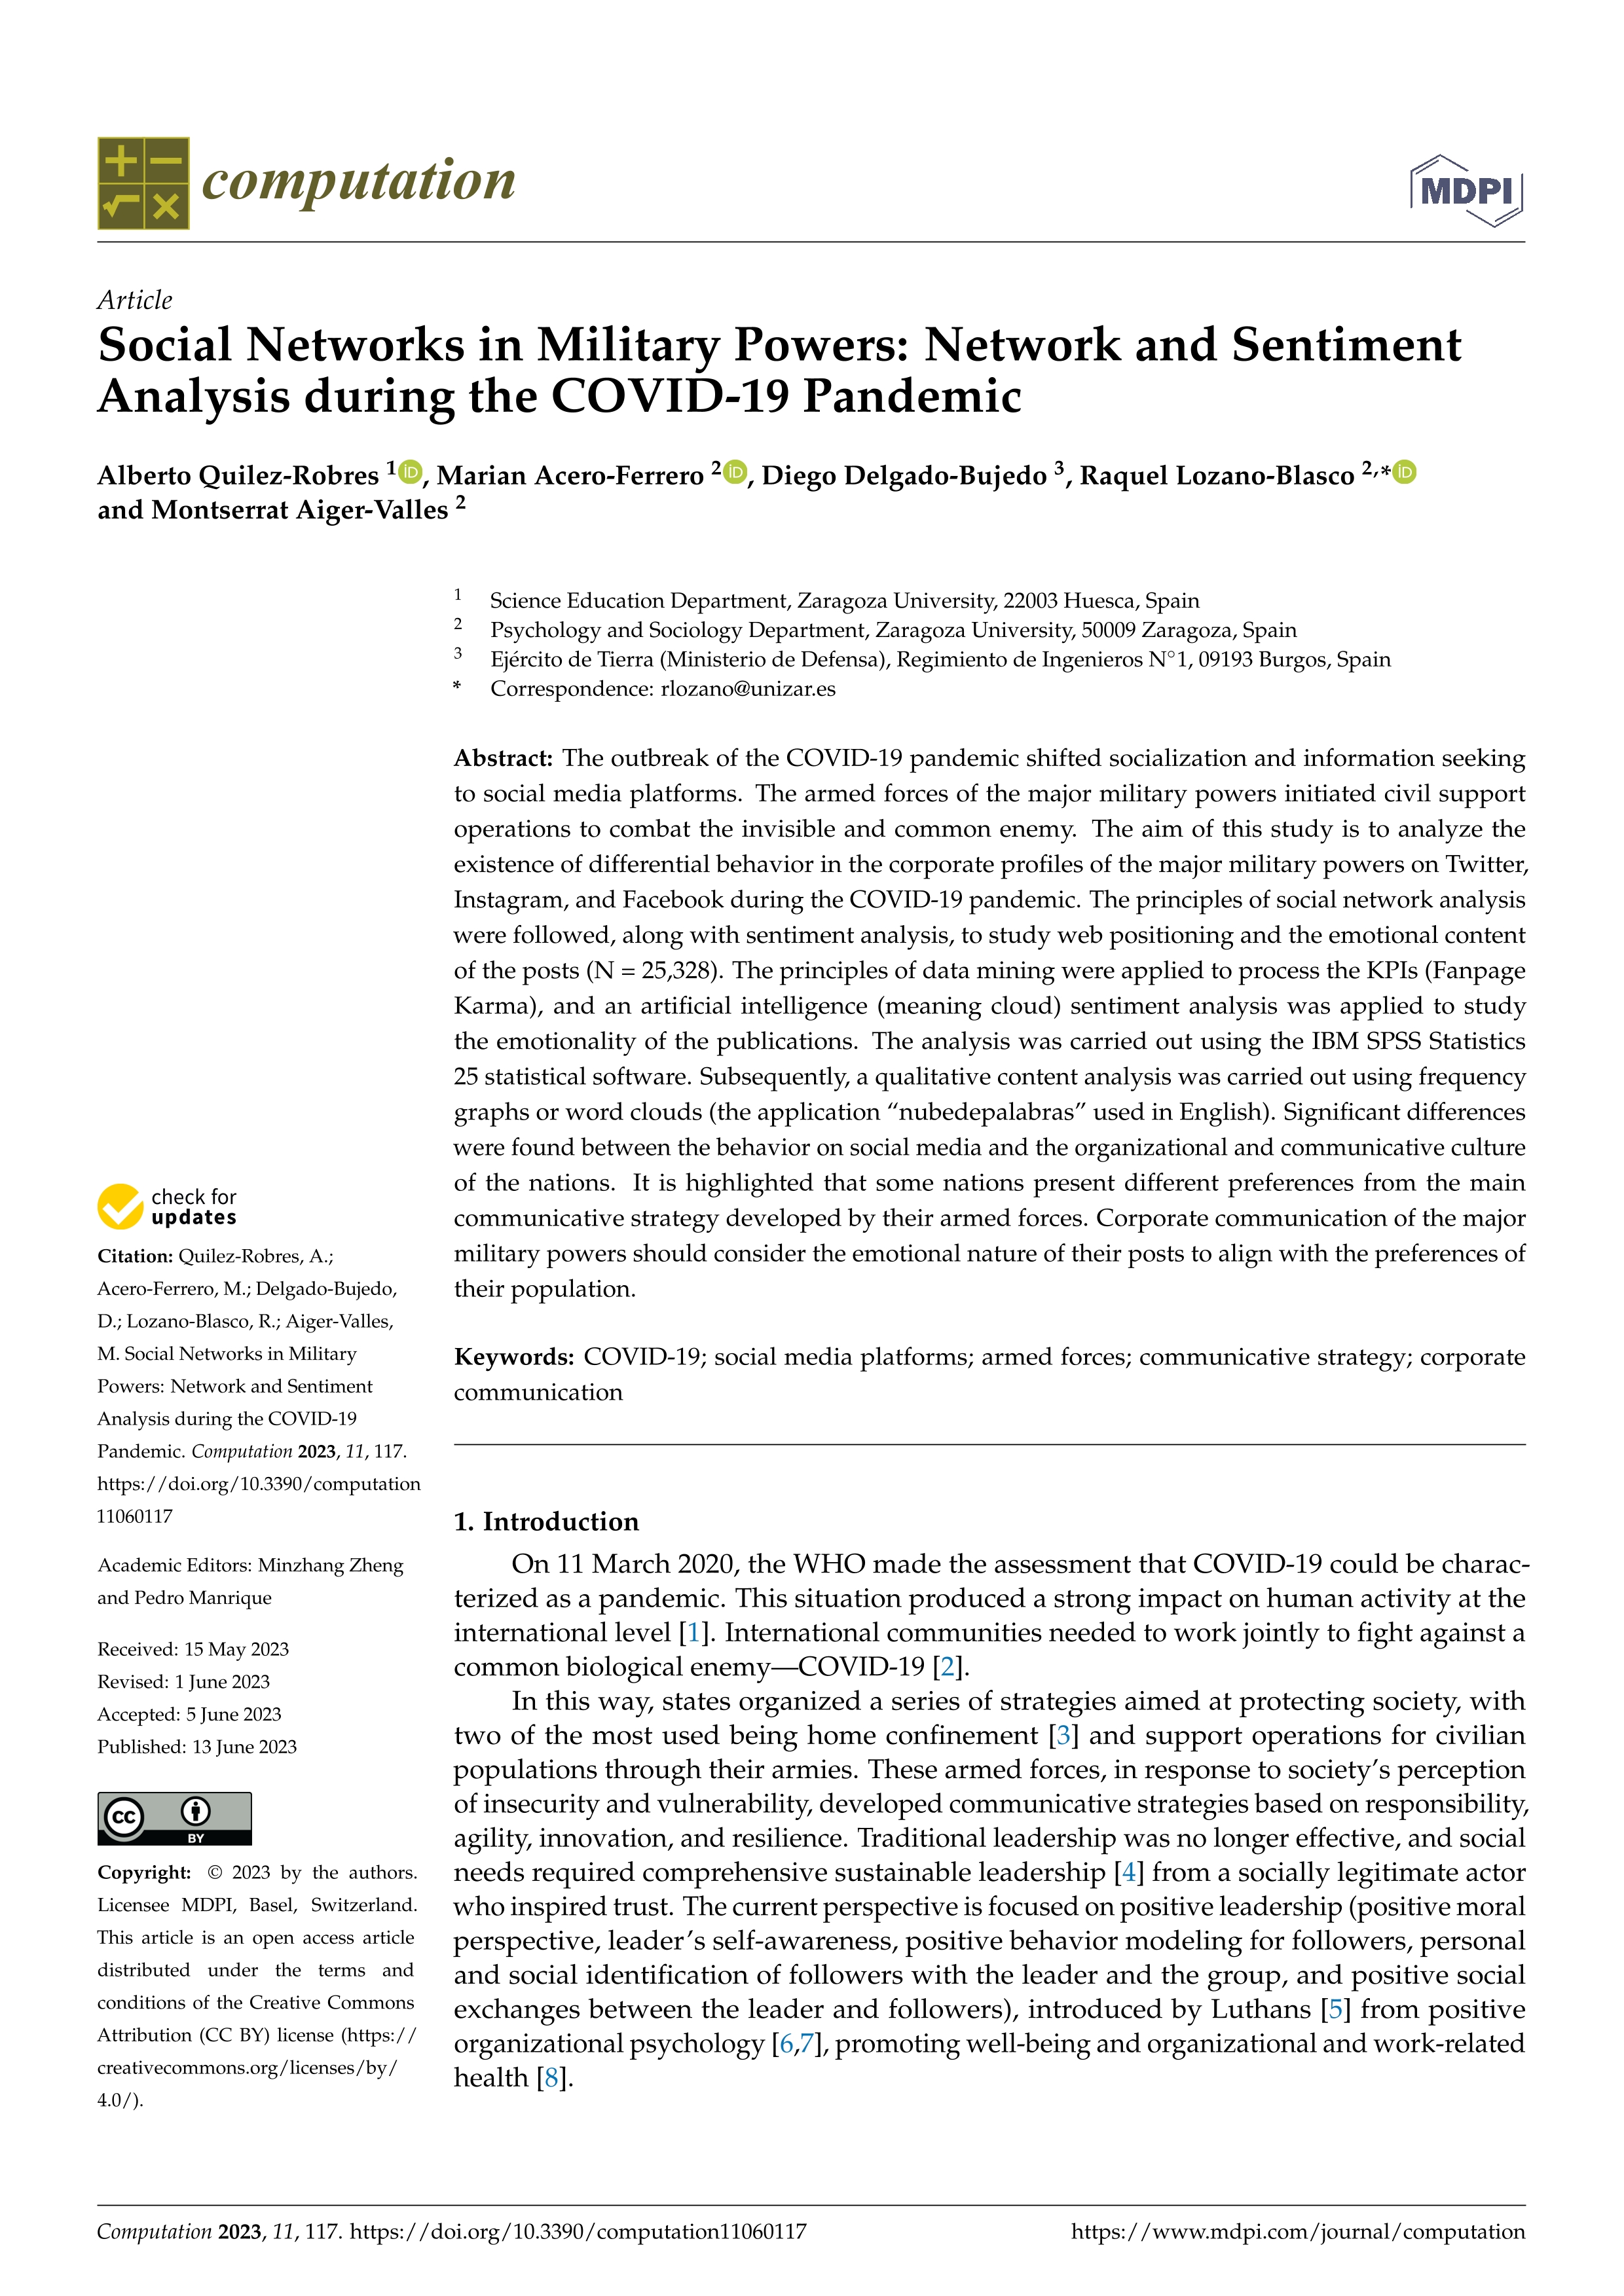 Social networks in military powers: network and sentiment analysis during the Covid-19 pandemic